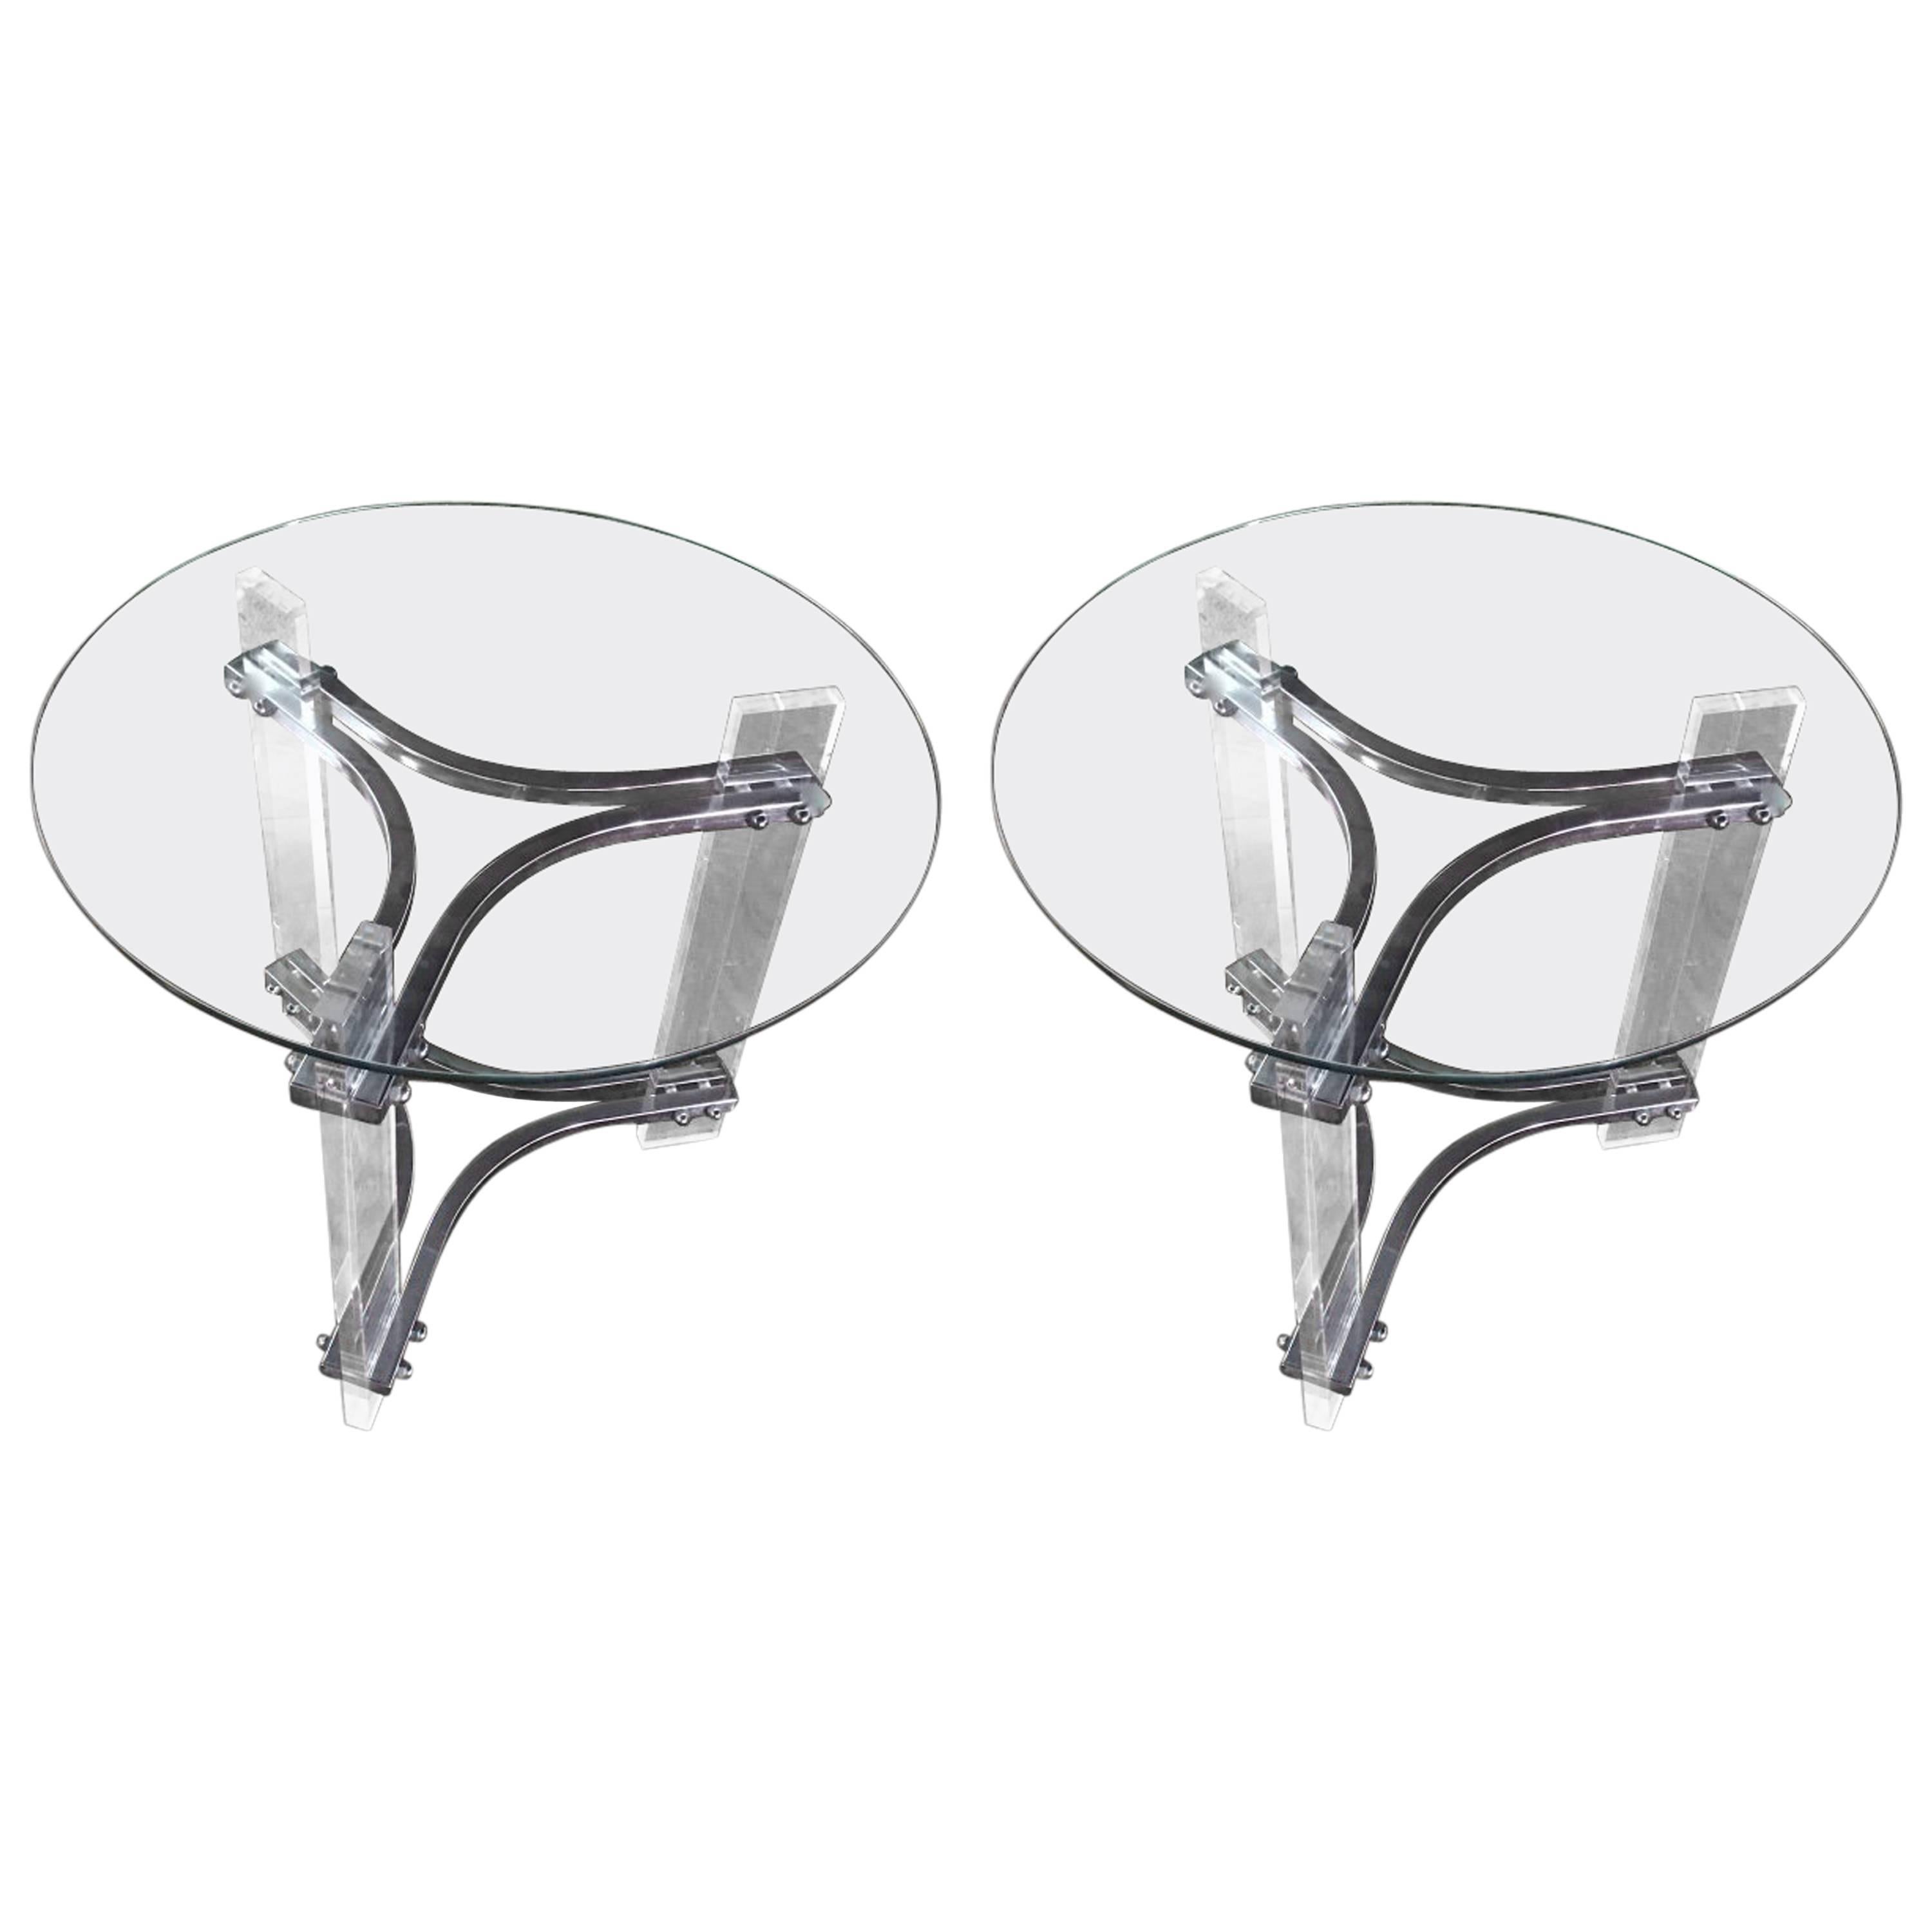 Pair of Mid-Century Modern Lucite, Chrome and Glass Side Tables